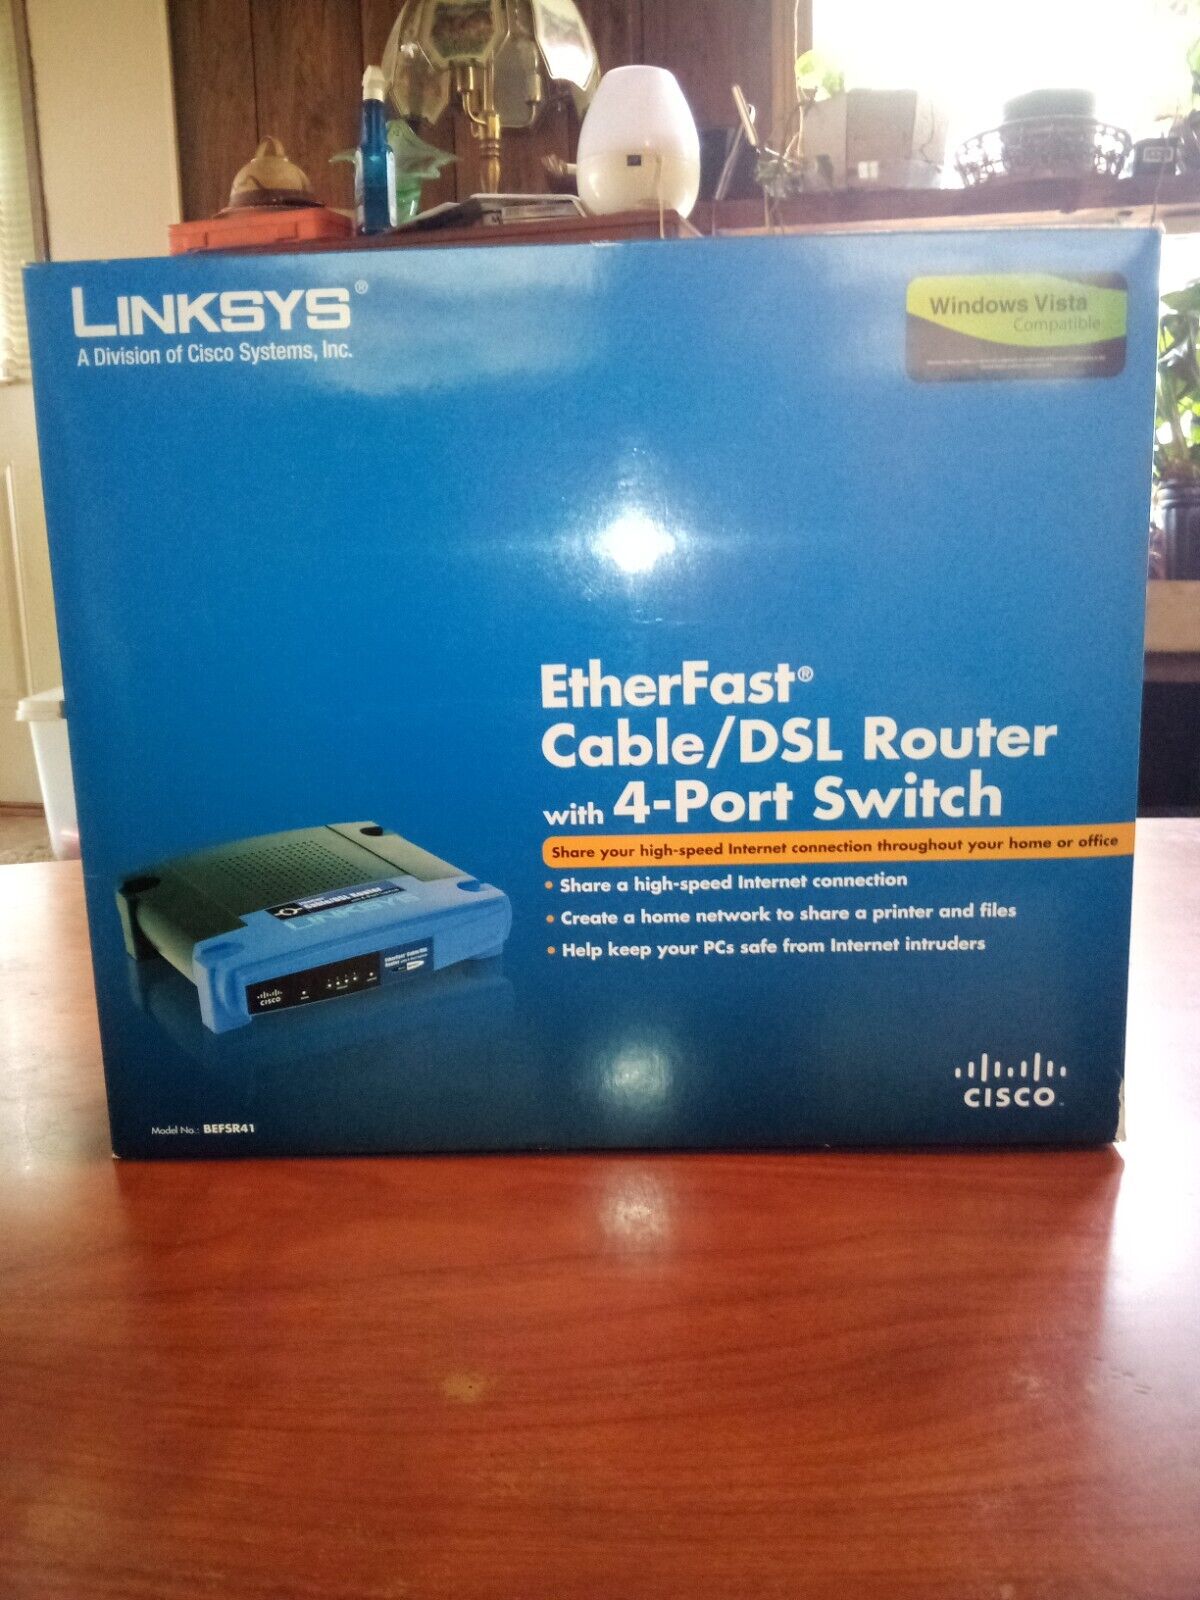 Linksys EtherFast Cable/DSL Router with 4-Port 10/100 Switch. Model  BEFSR41.